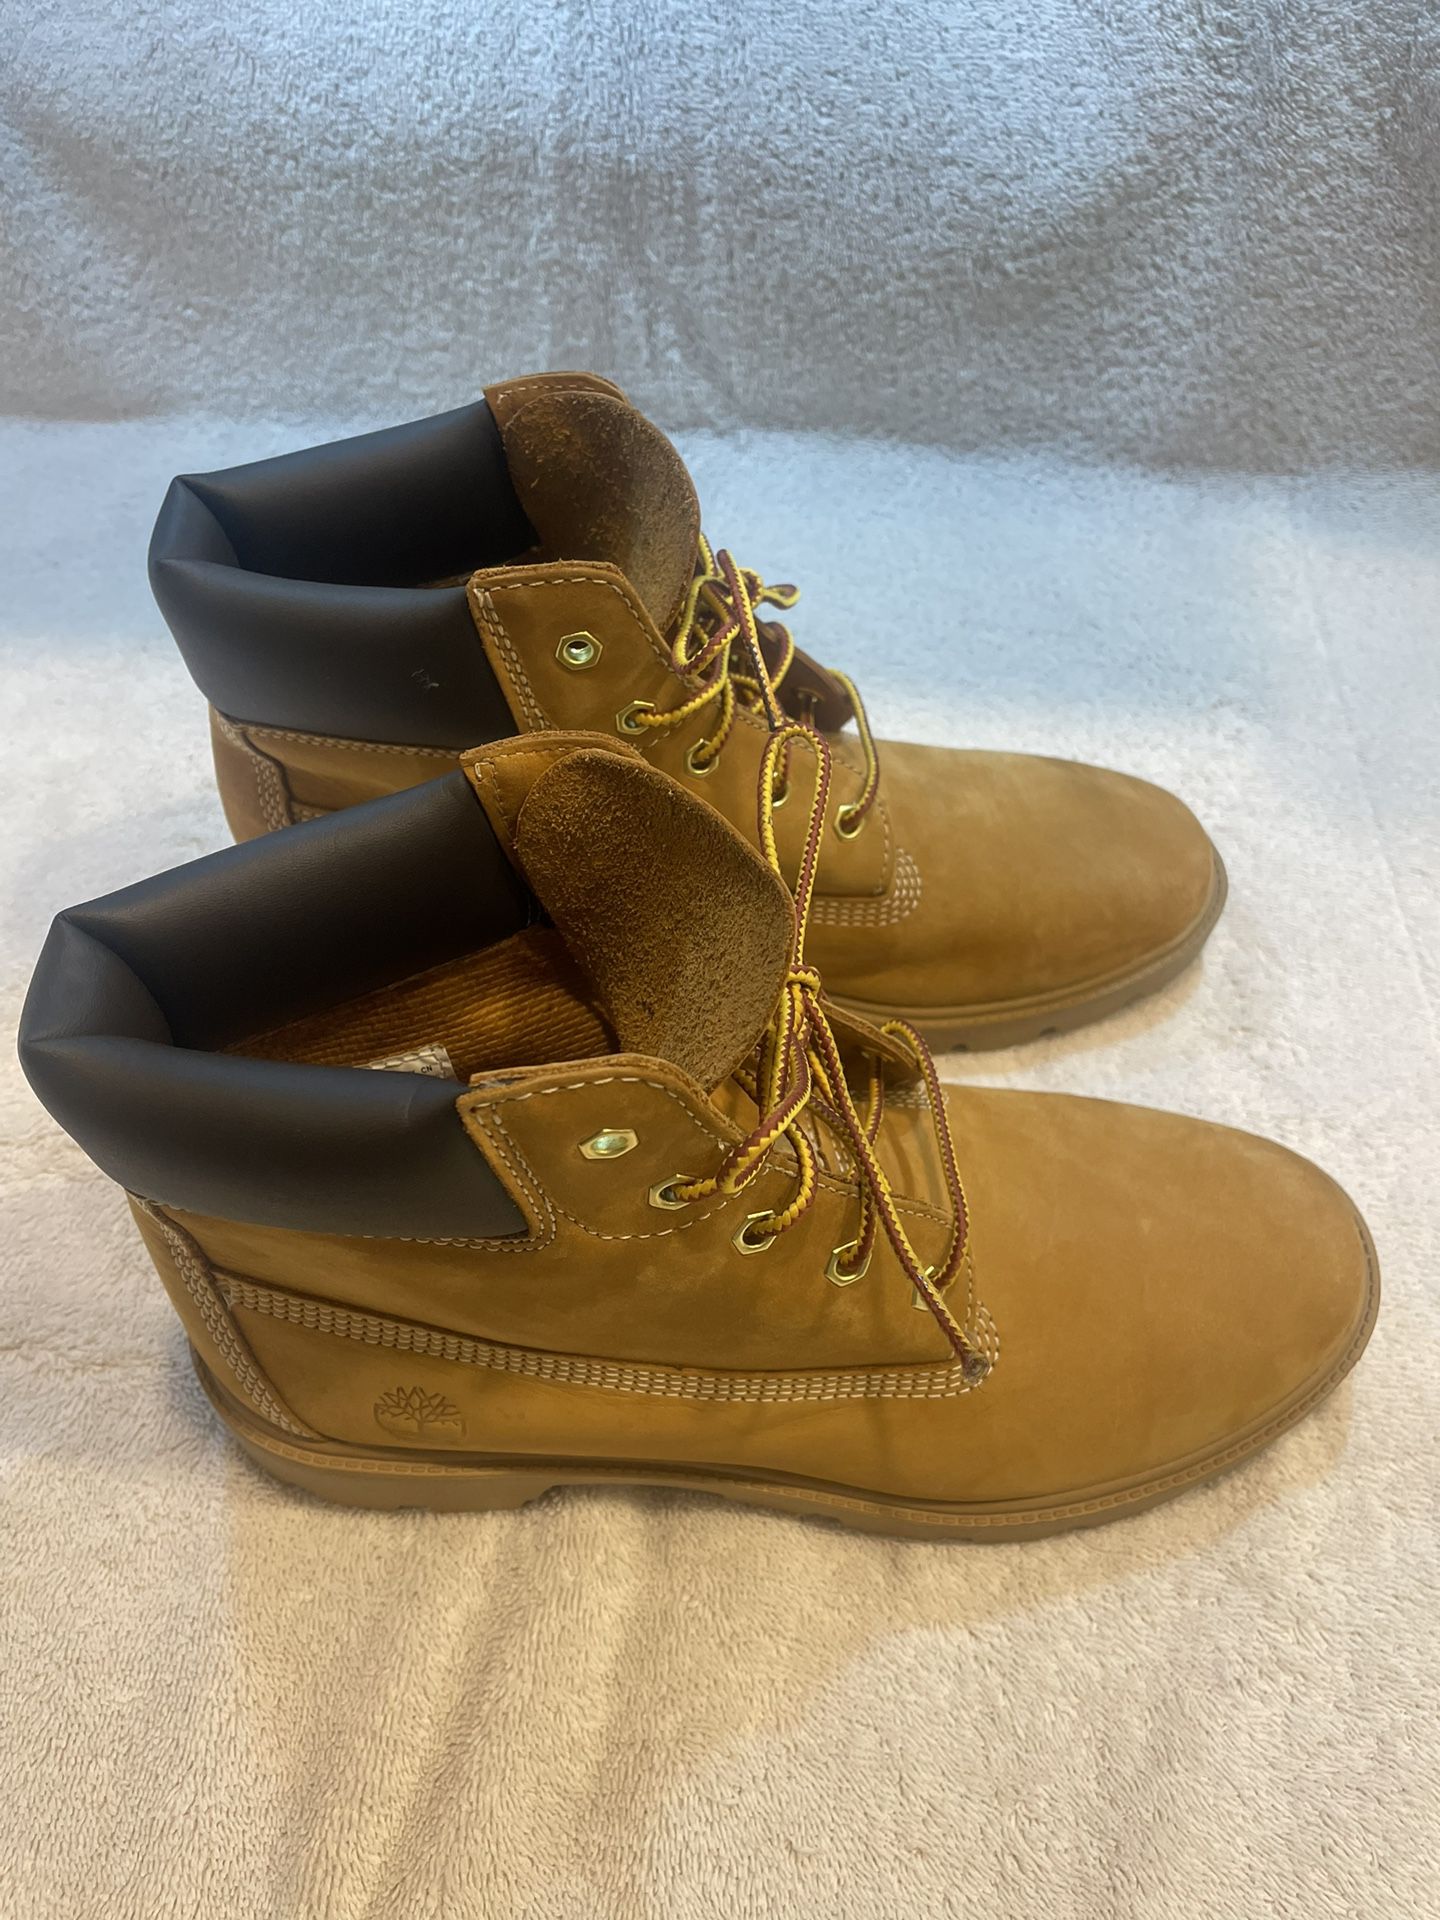 Timberland Suede Waterproof Boots Size 6.5